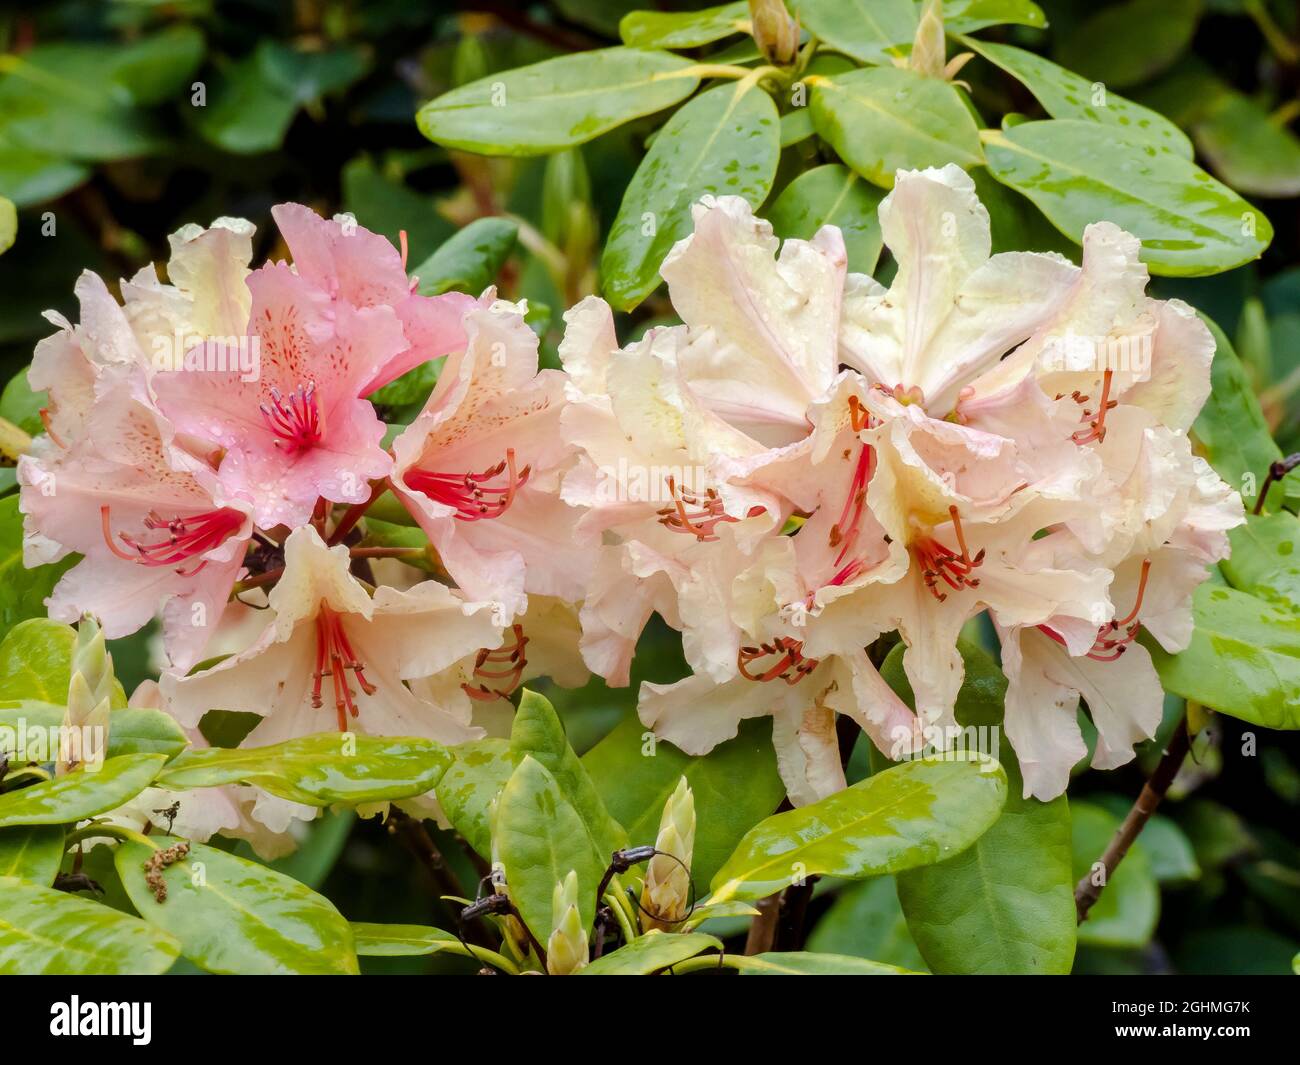 Rhododendron 'Brazil' in bloom in a garden Stock Photo